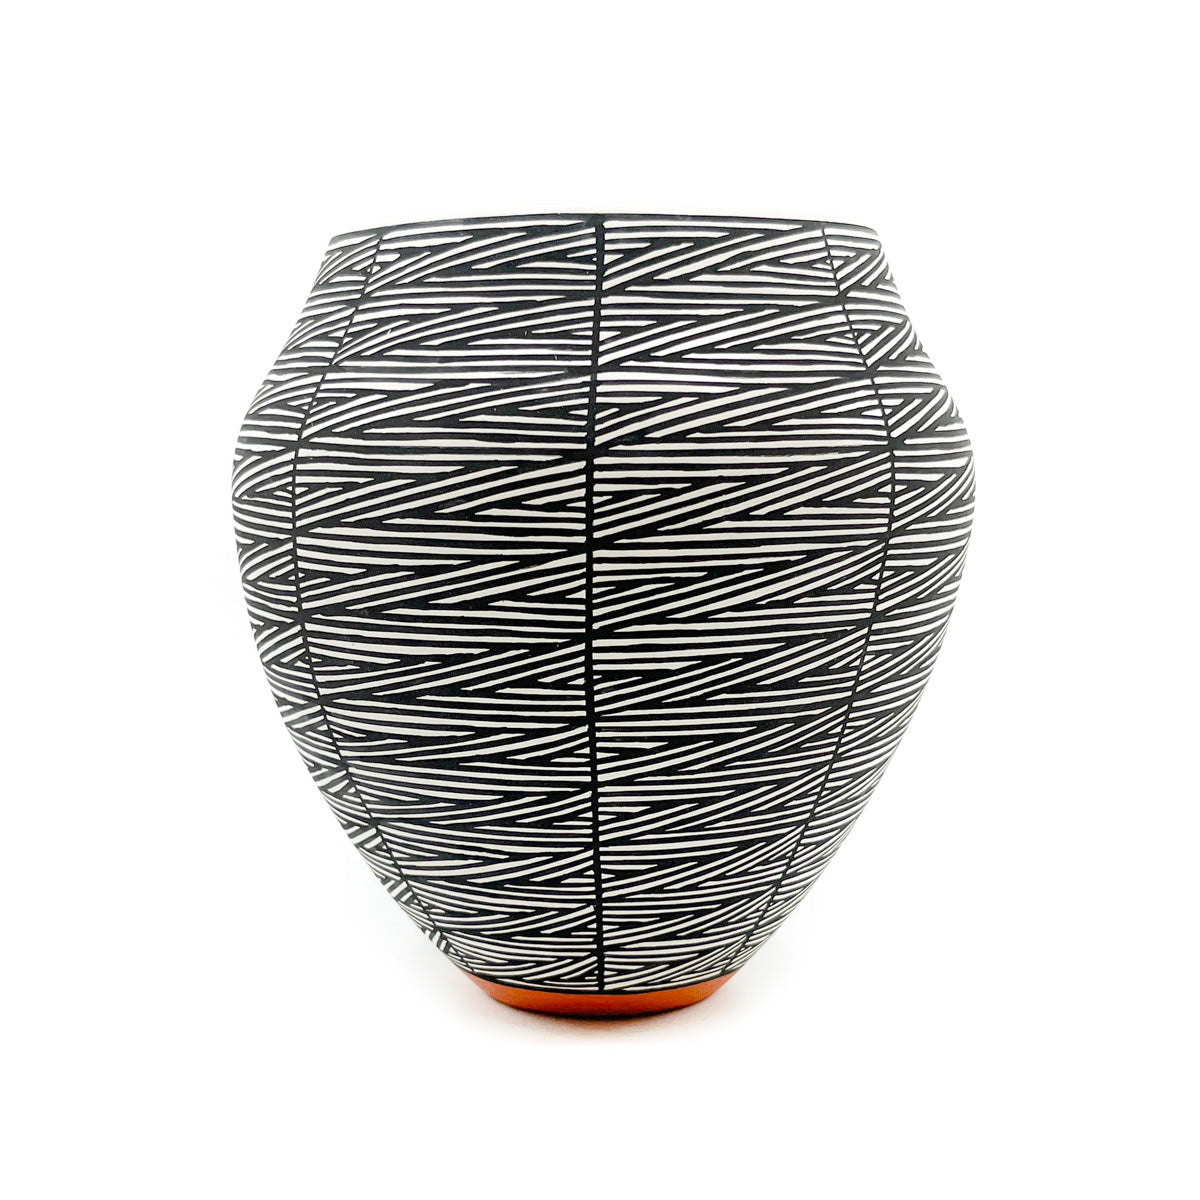 Traditional Acoma Pot with a Contemporary Flair